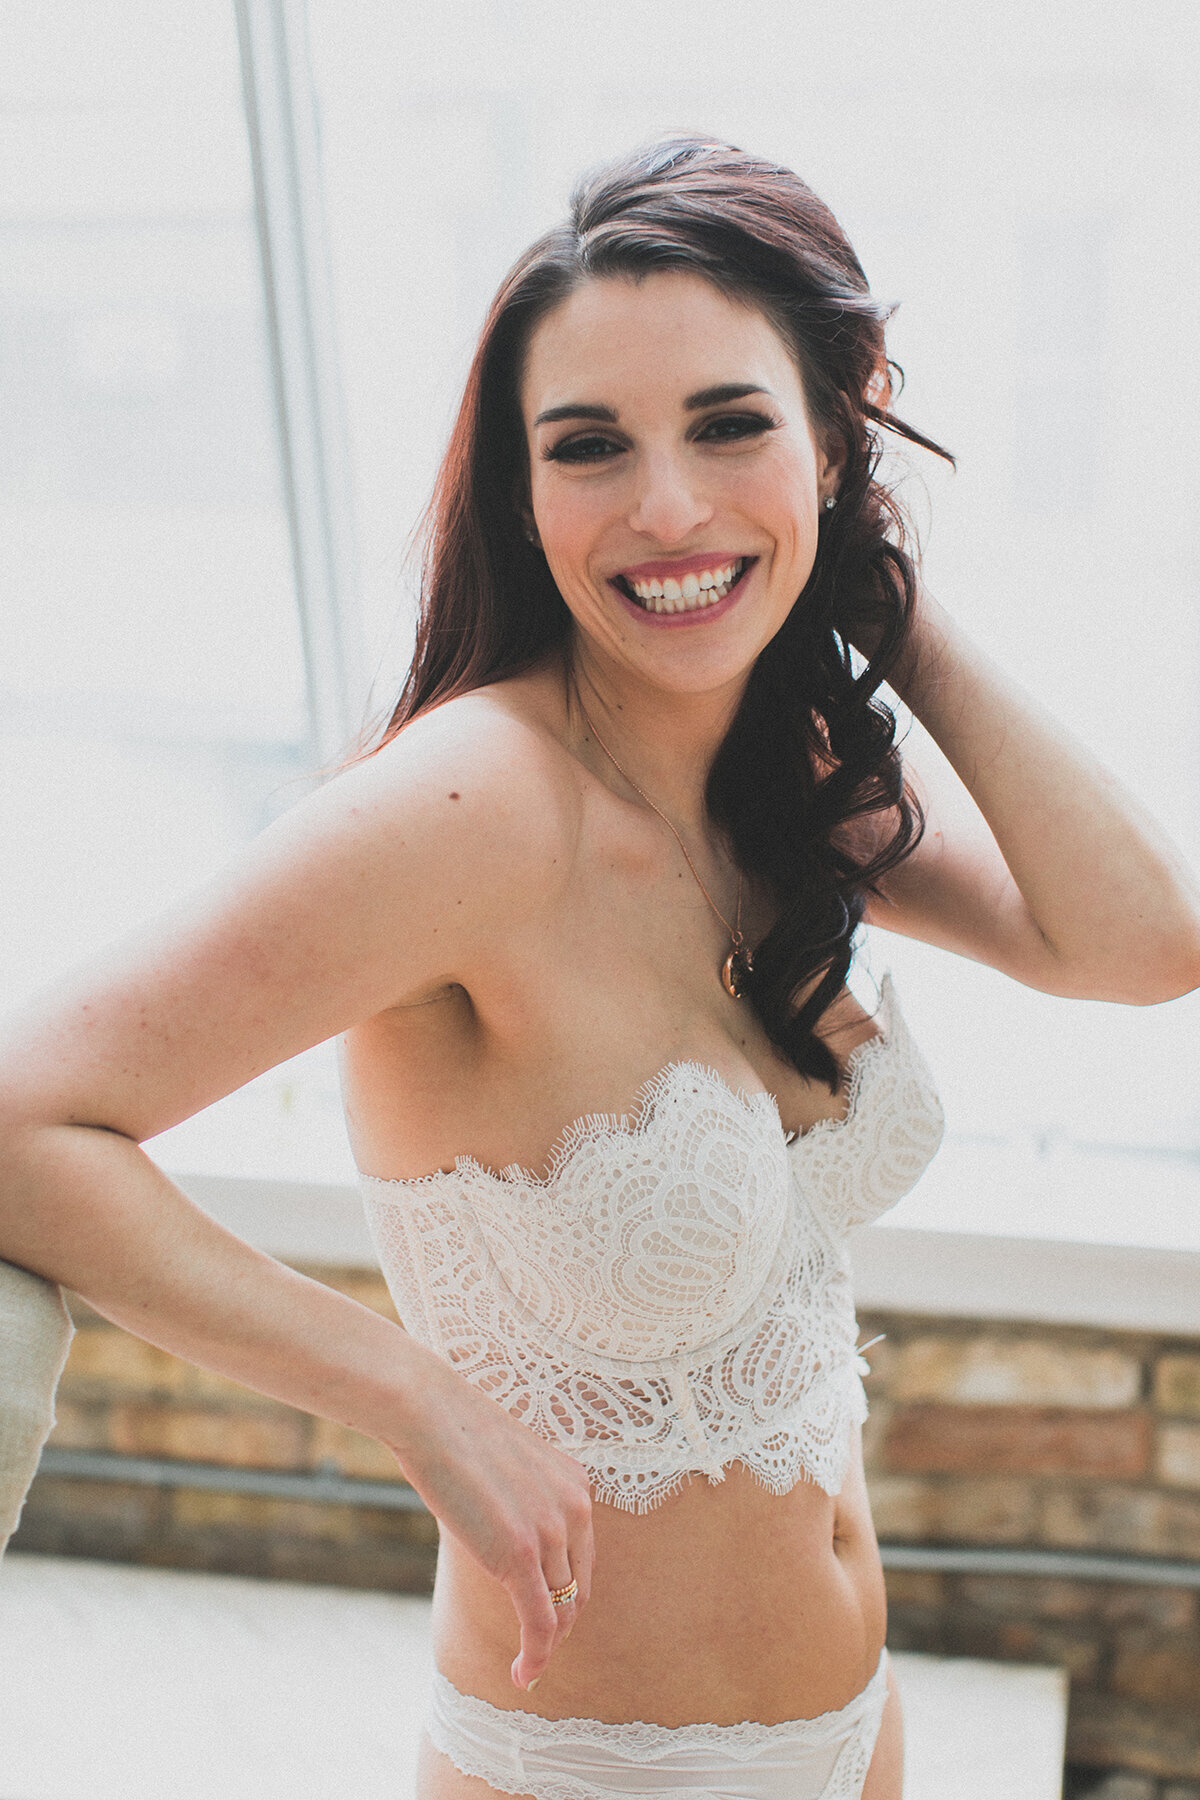 A woman wears all white lingerie and a sentimental necklace for her boudoir photoshoot in Chicago.